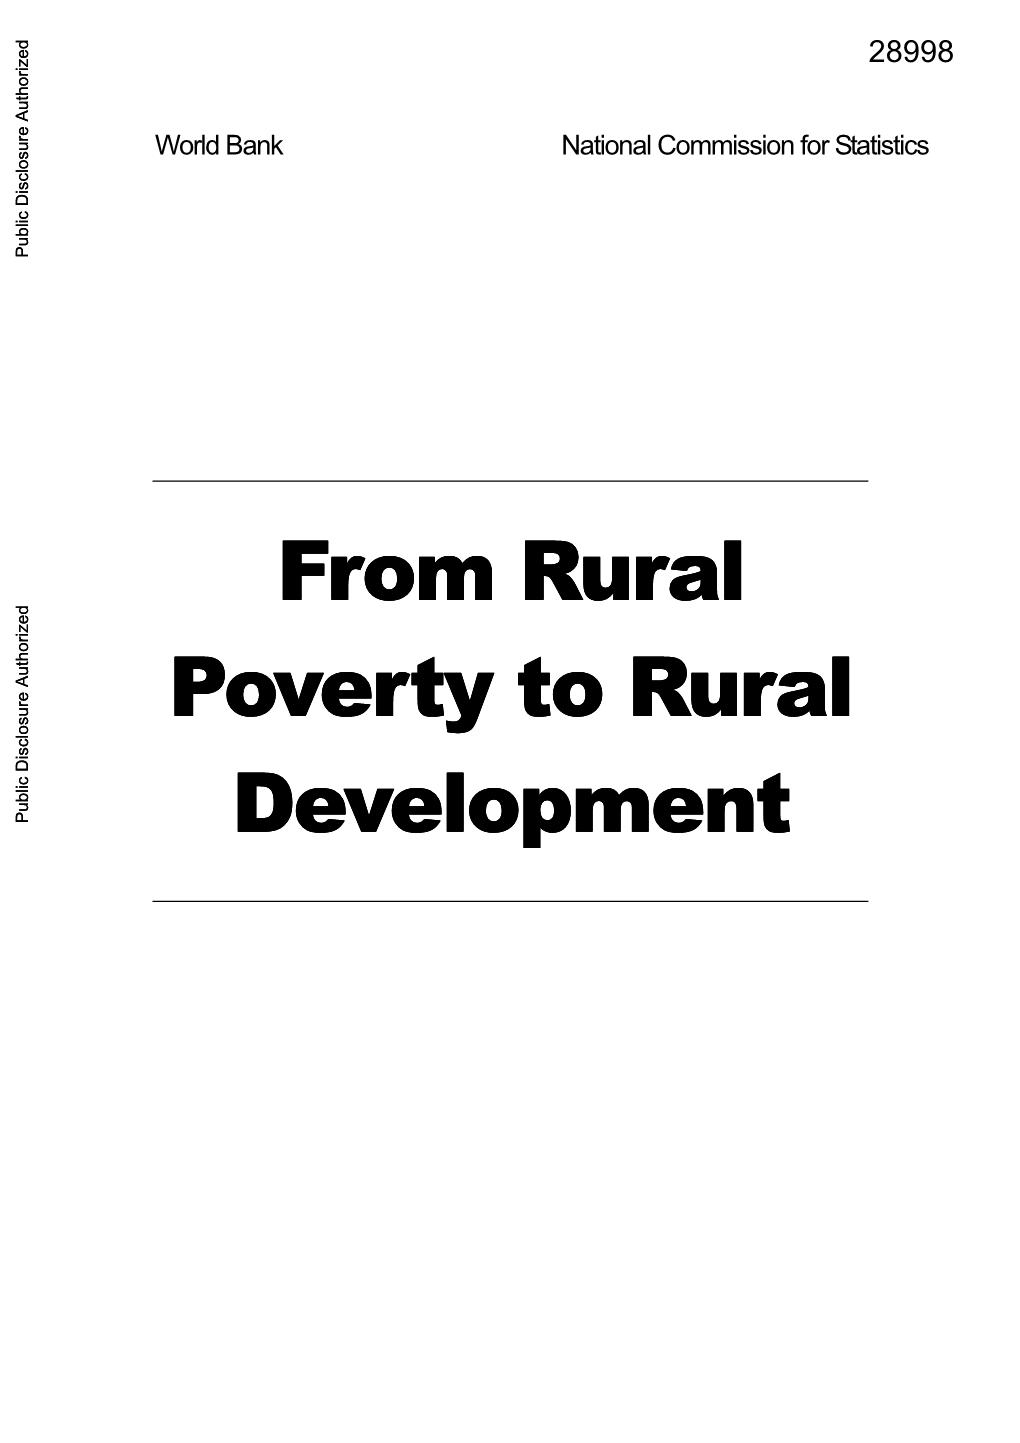 2. a Profile of Rural Poverty